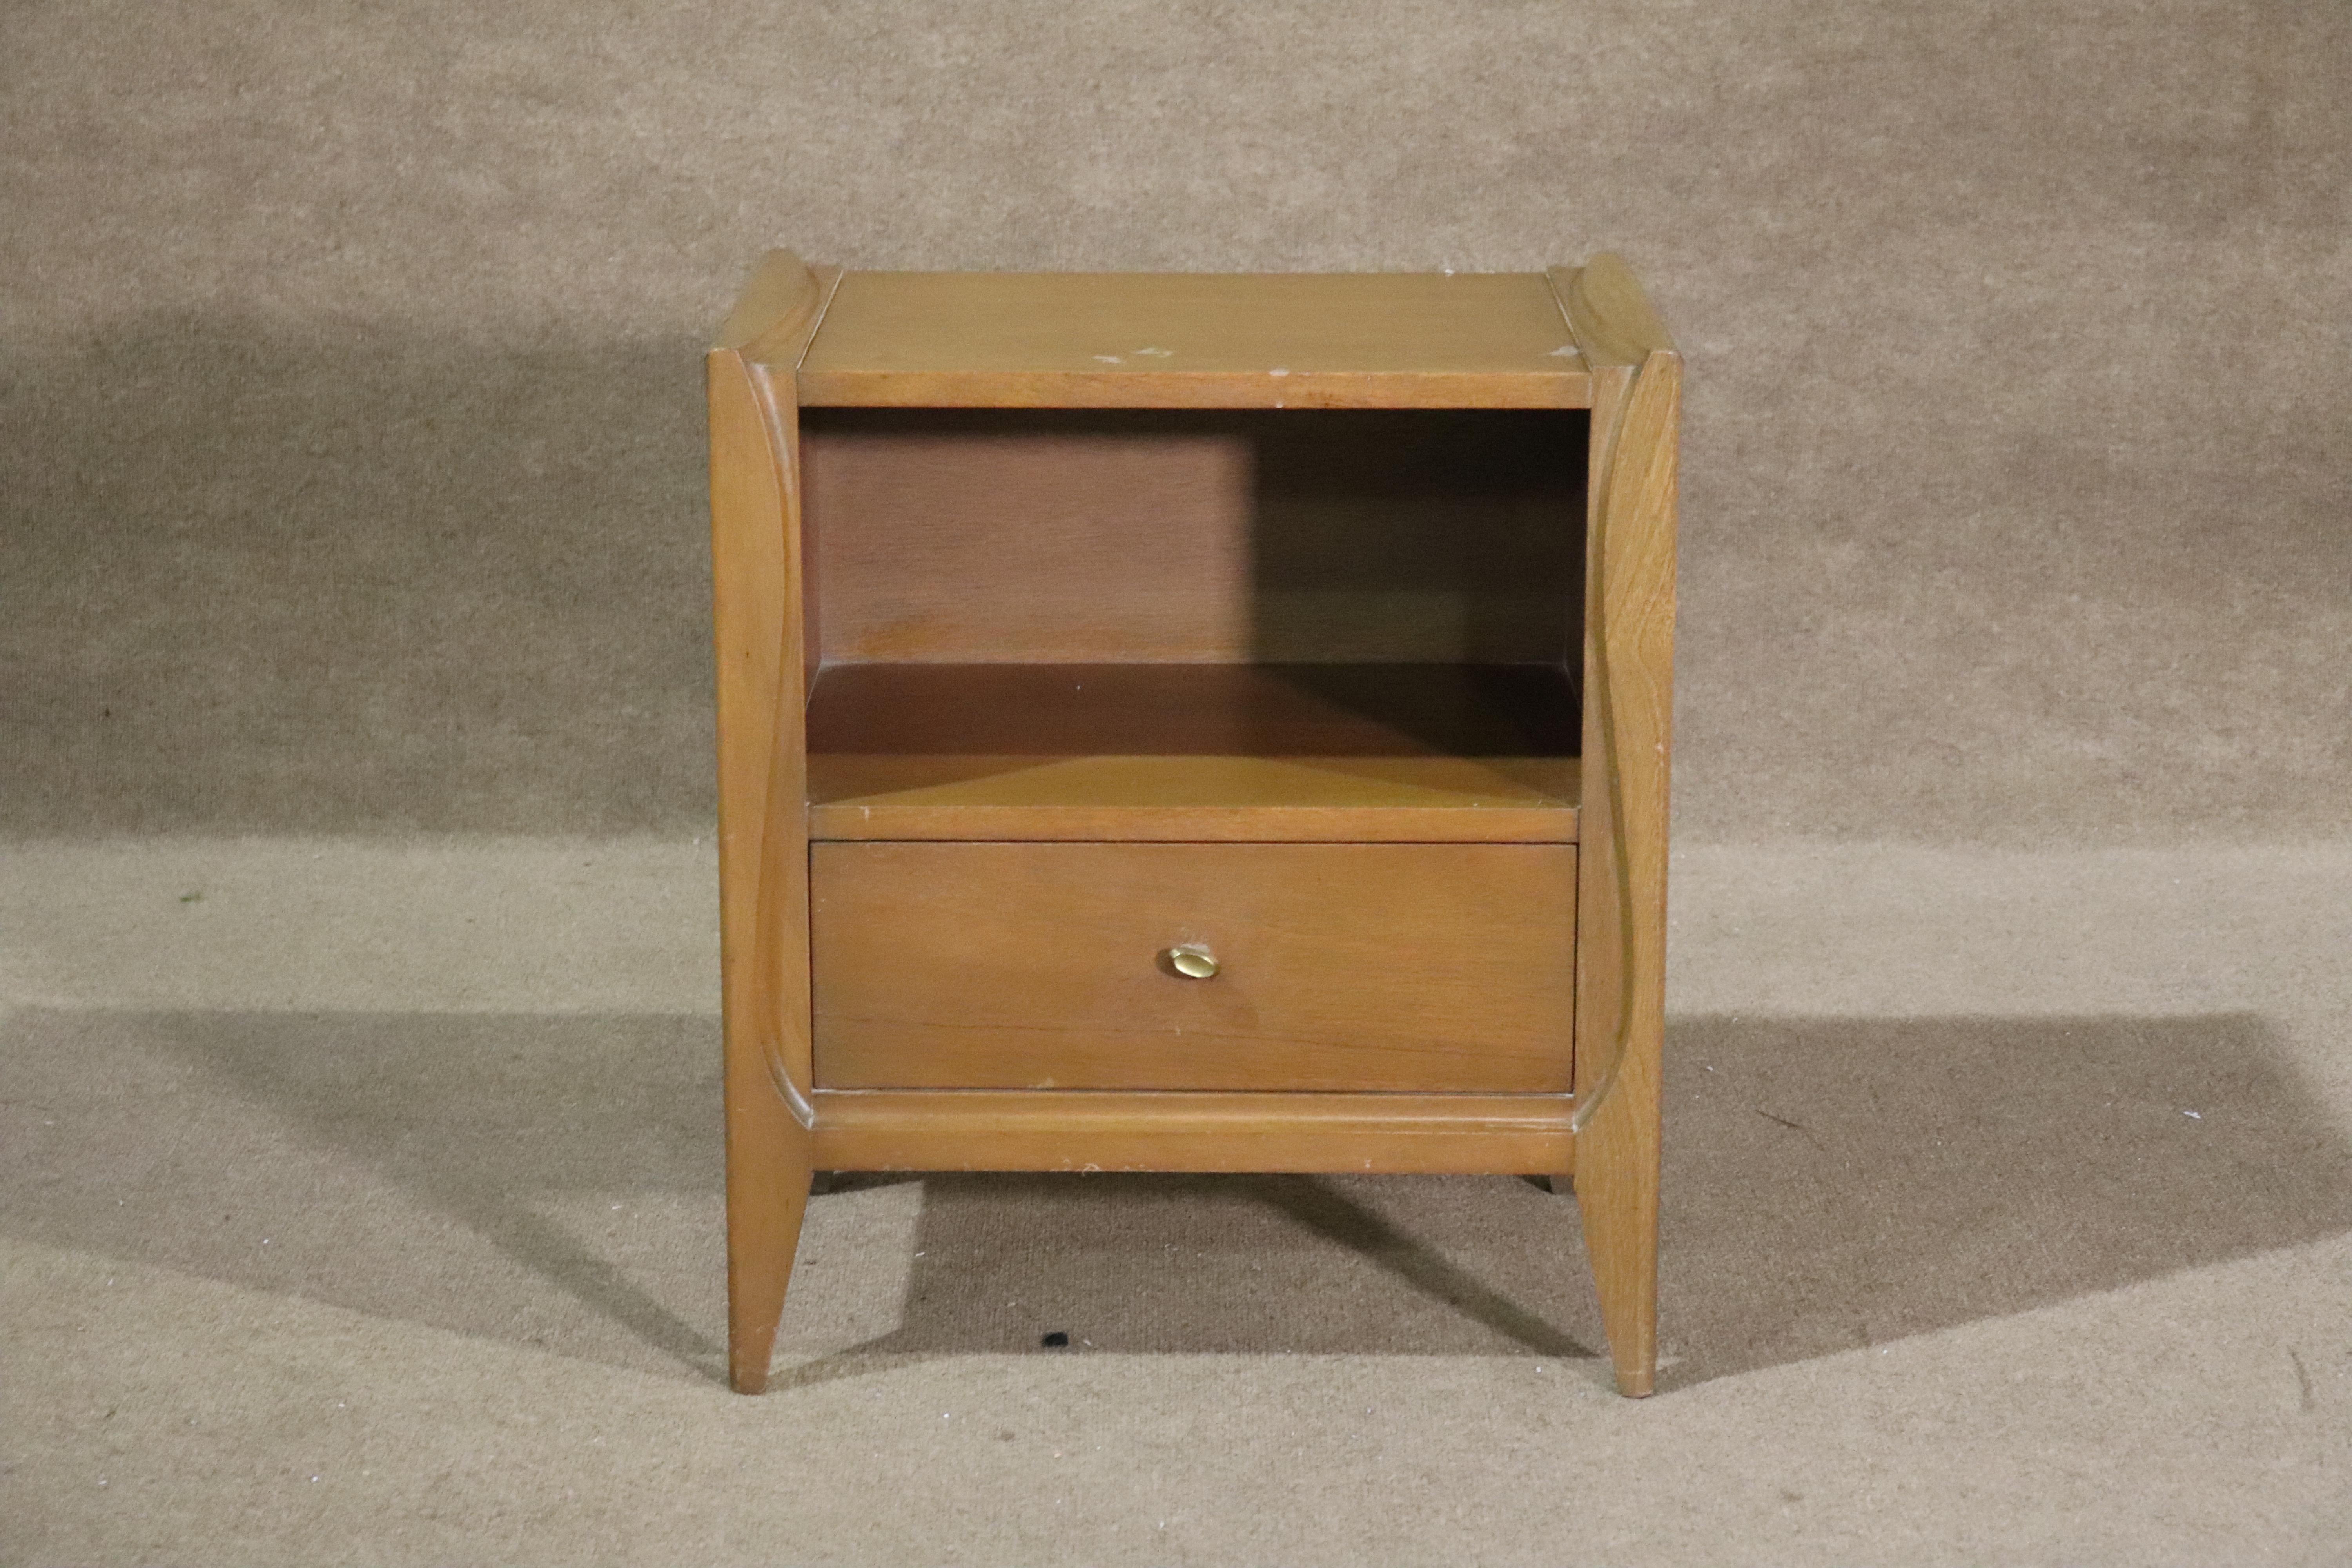 This American made side table is a great example of 1960s style and design. Warm walnut grain table with open storage and single drawer for storage. Attractive top with sculpted edges.
Please confirm location NY or NJ